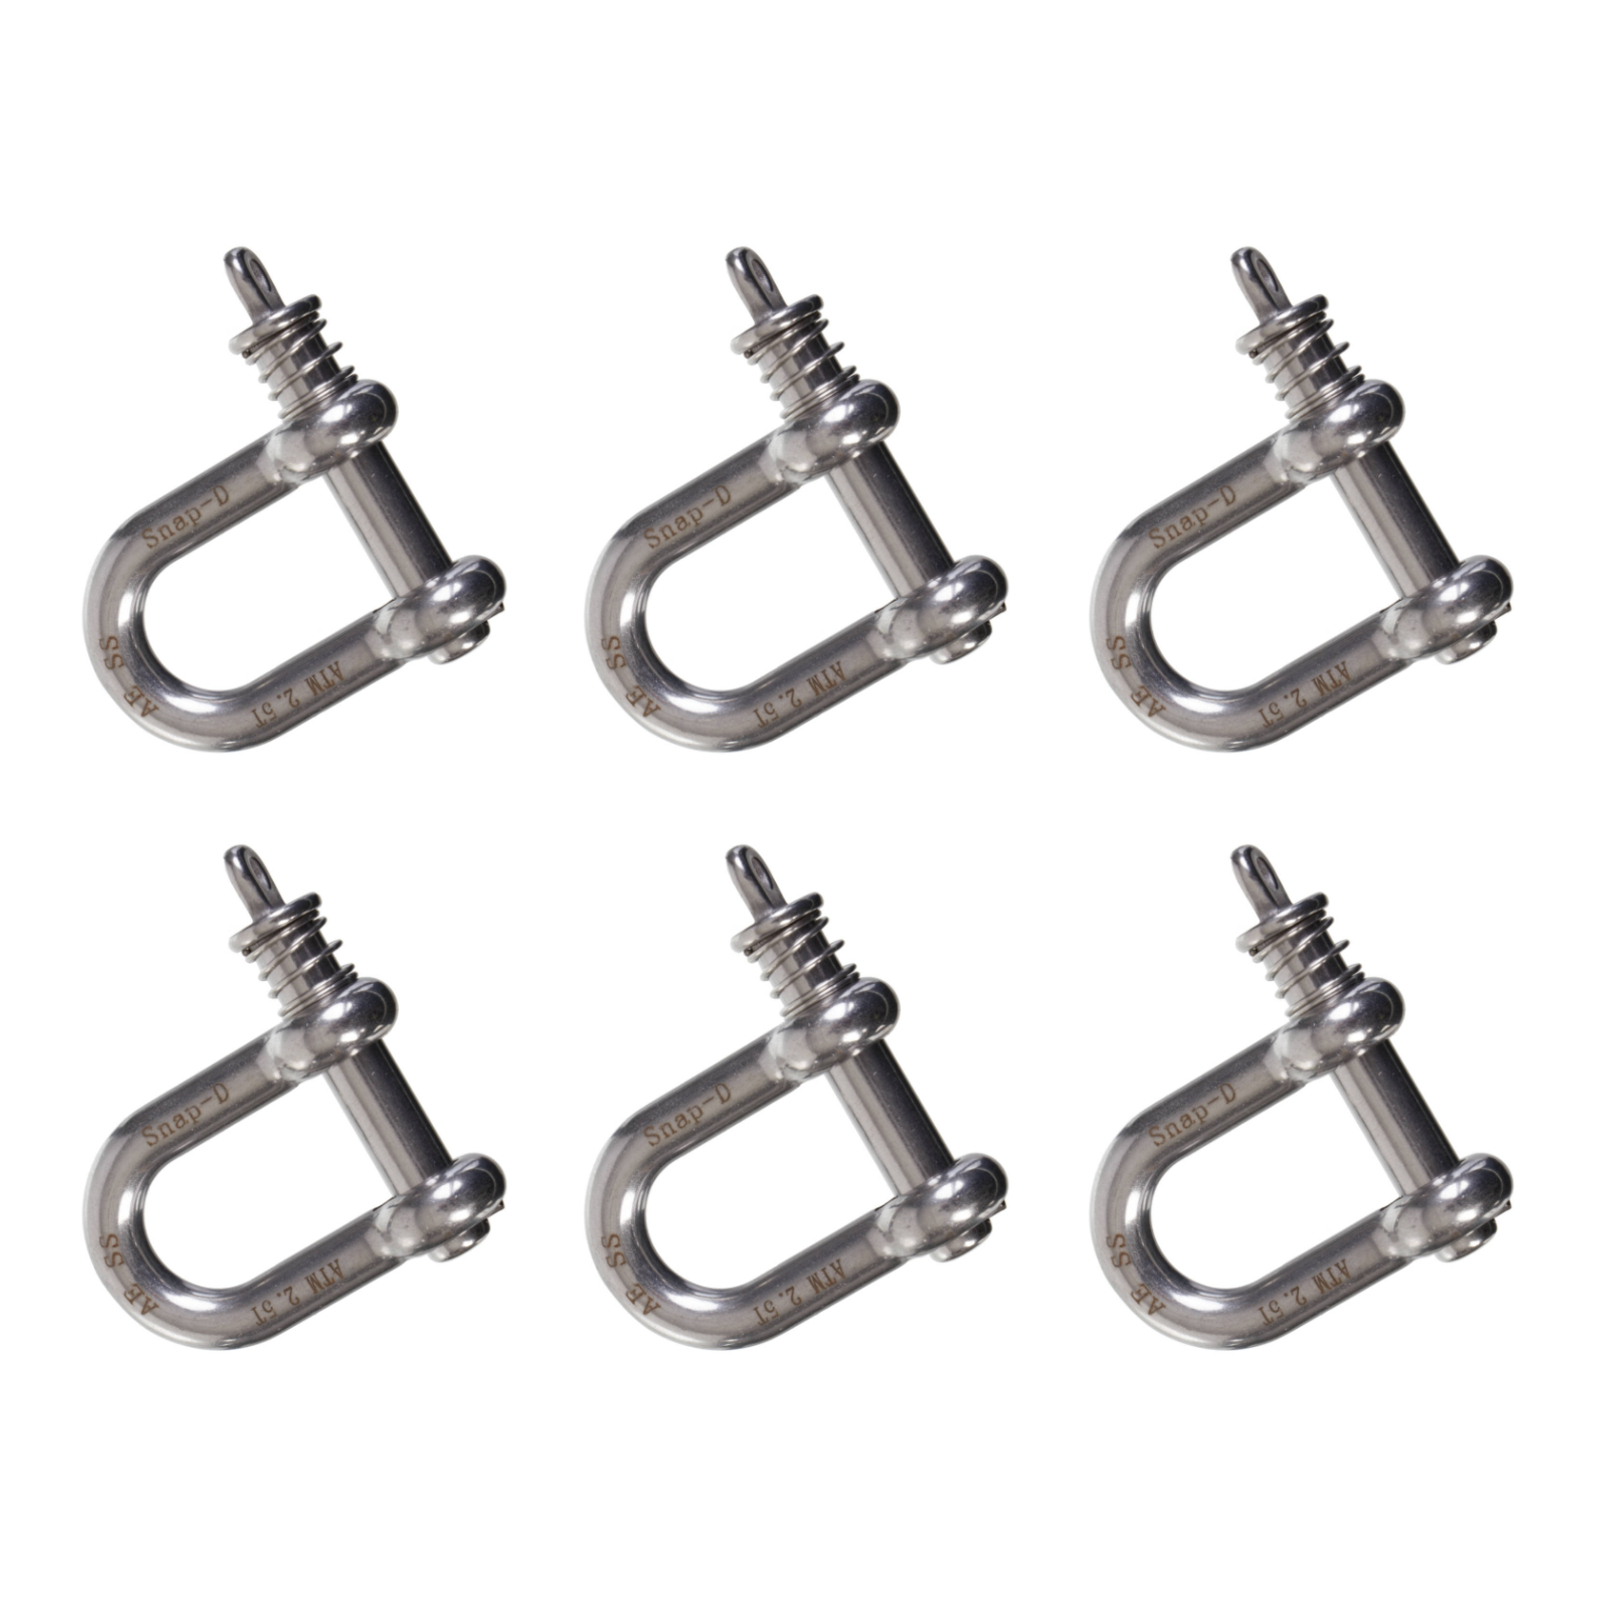 SNAP-D 12MM D SHACKLE - 6 PACK SPECIAL